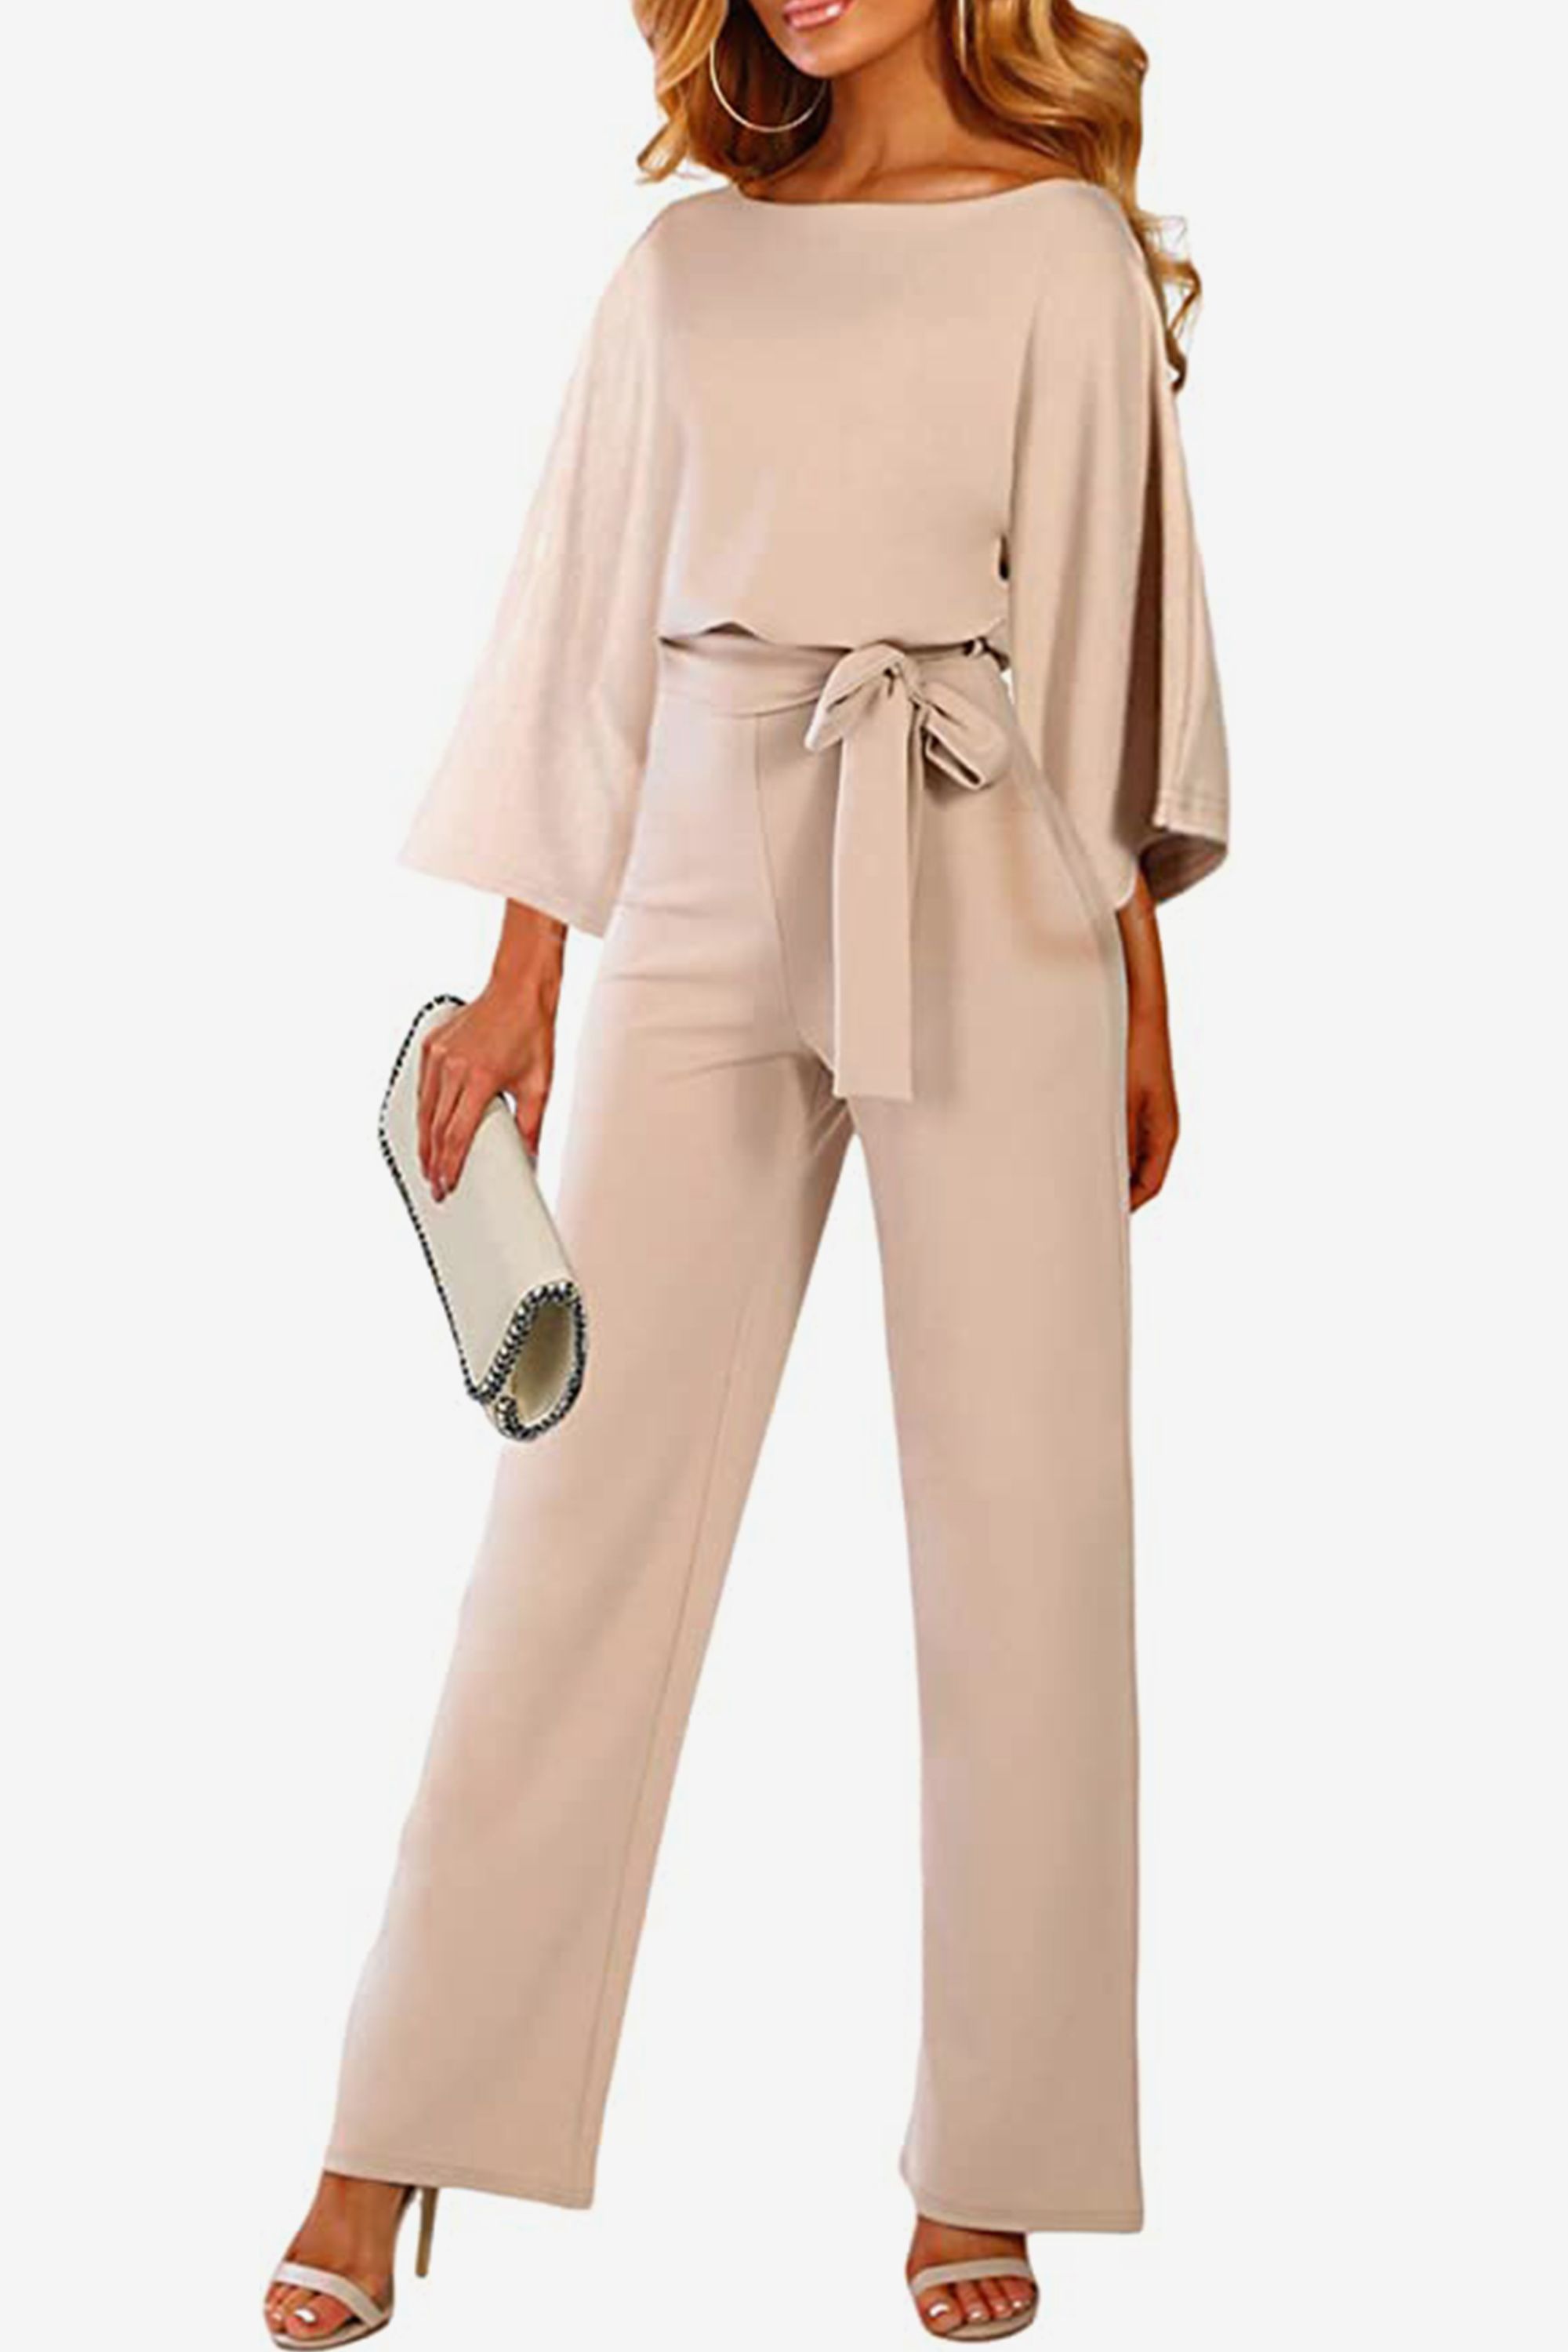 Women's Casual Belted Wide Leg Pant Jumpsuit